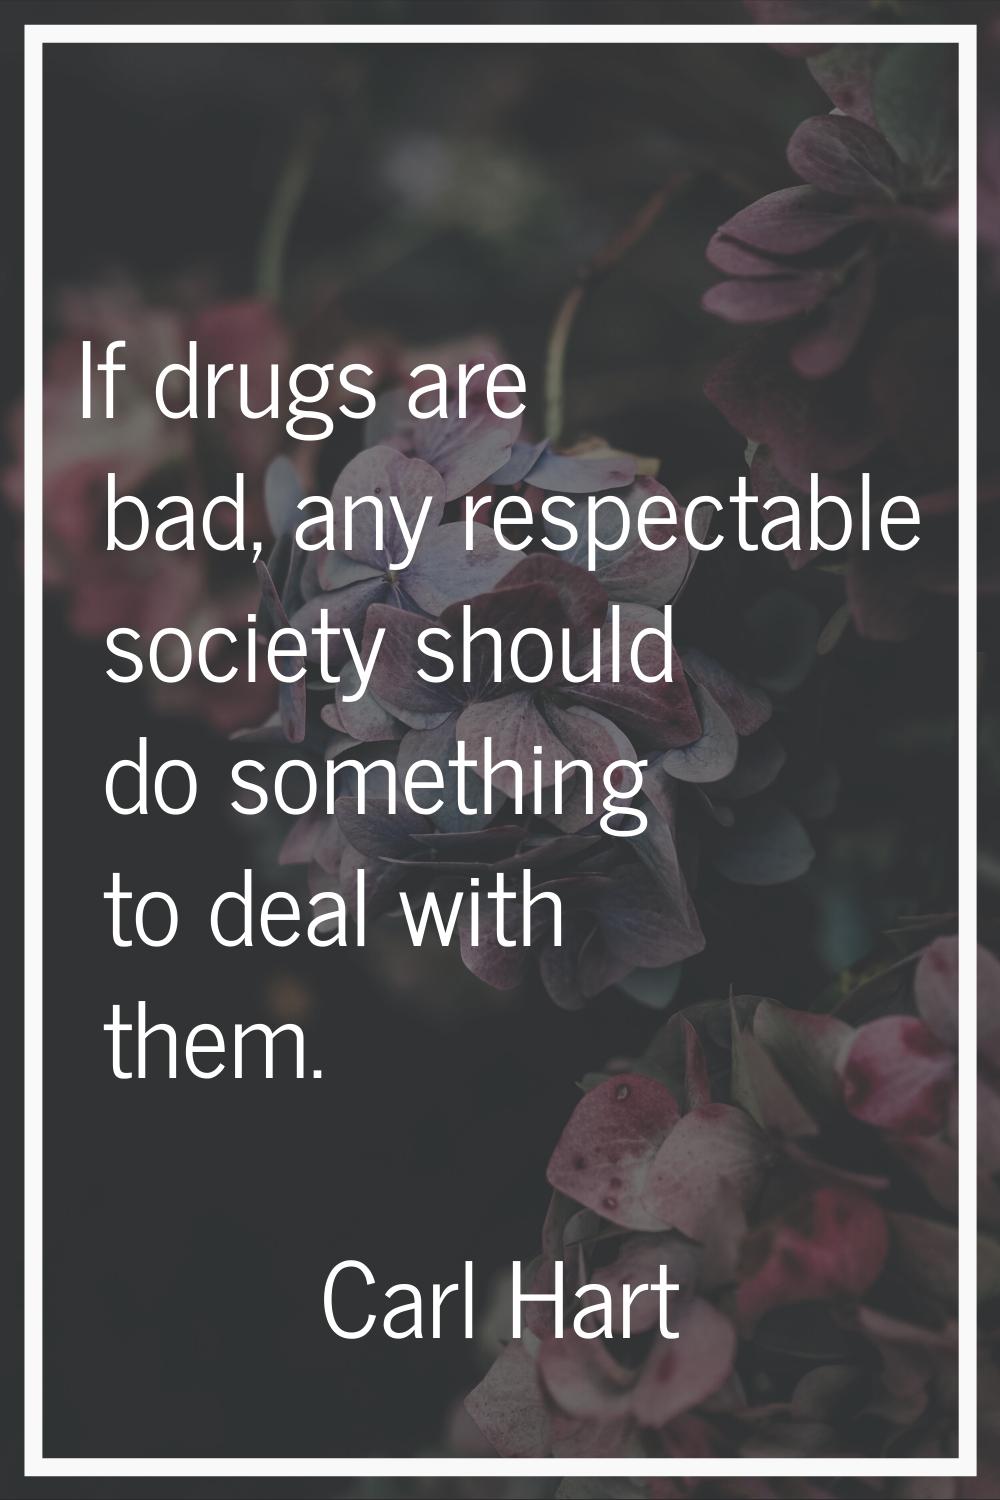 If drugs are bad, any respectable society should do something to deal with them.